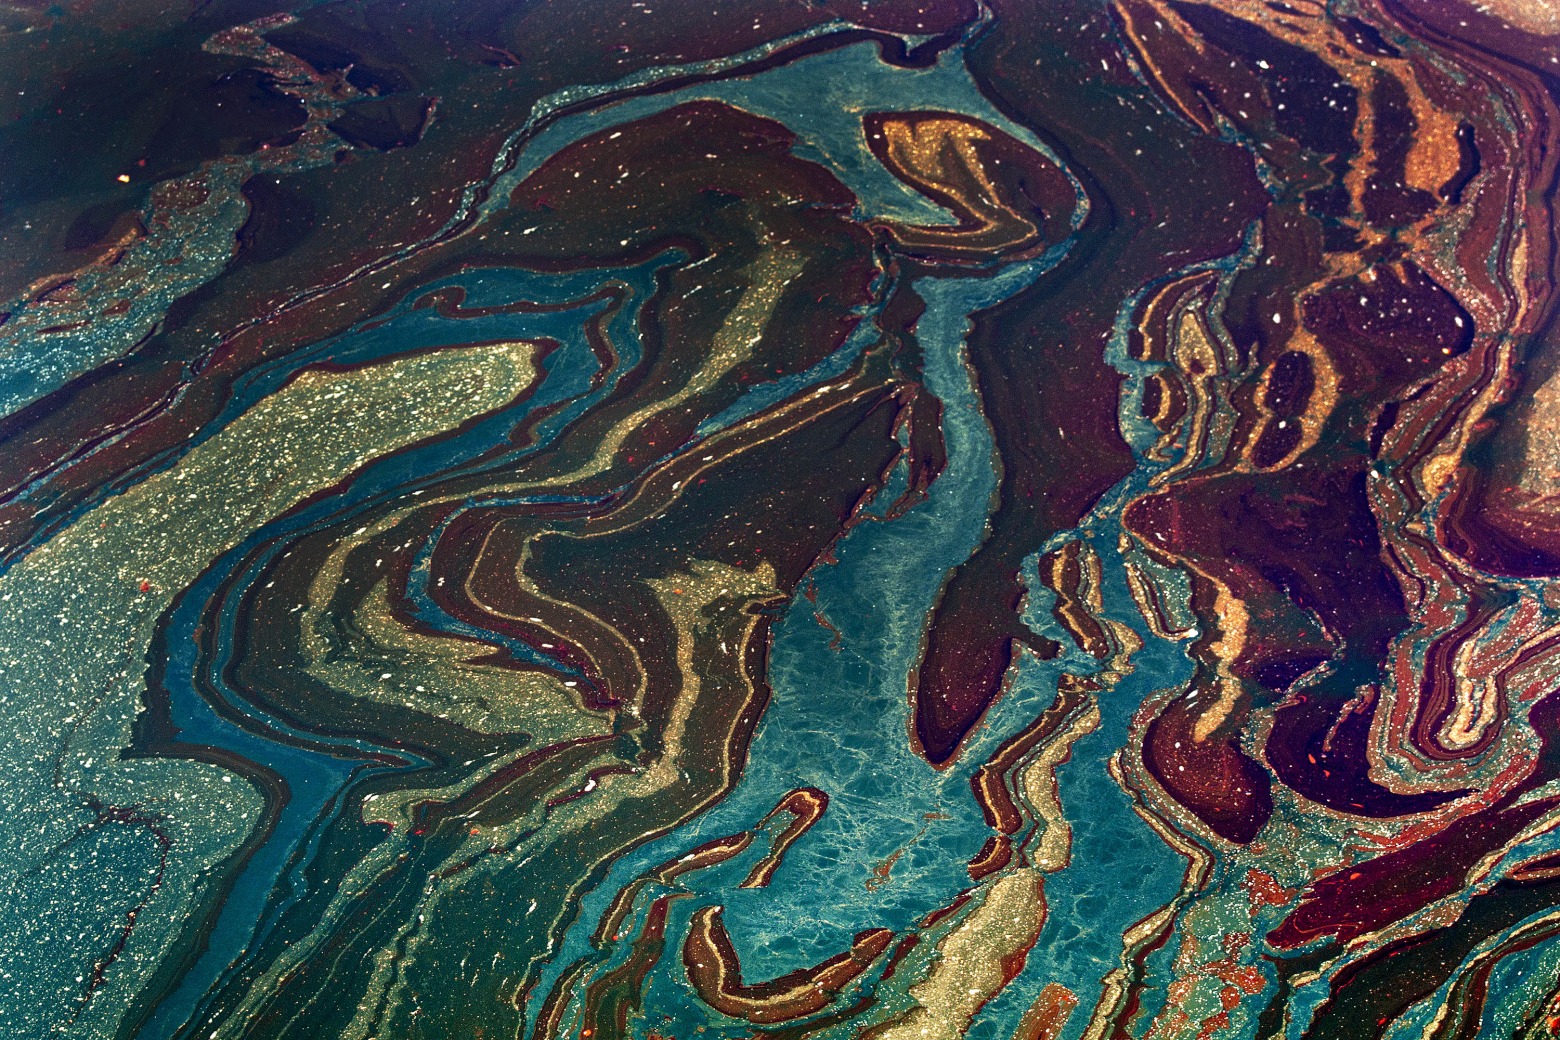 BP Oil Spill Gushing Up To 60,000 Barrels Of Oil A Day Into Gulf Of Mexico